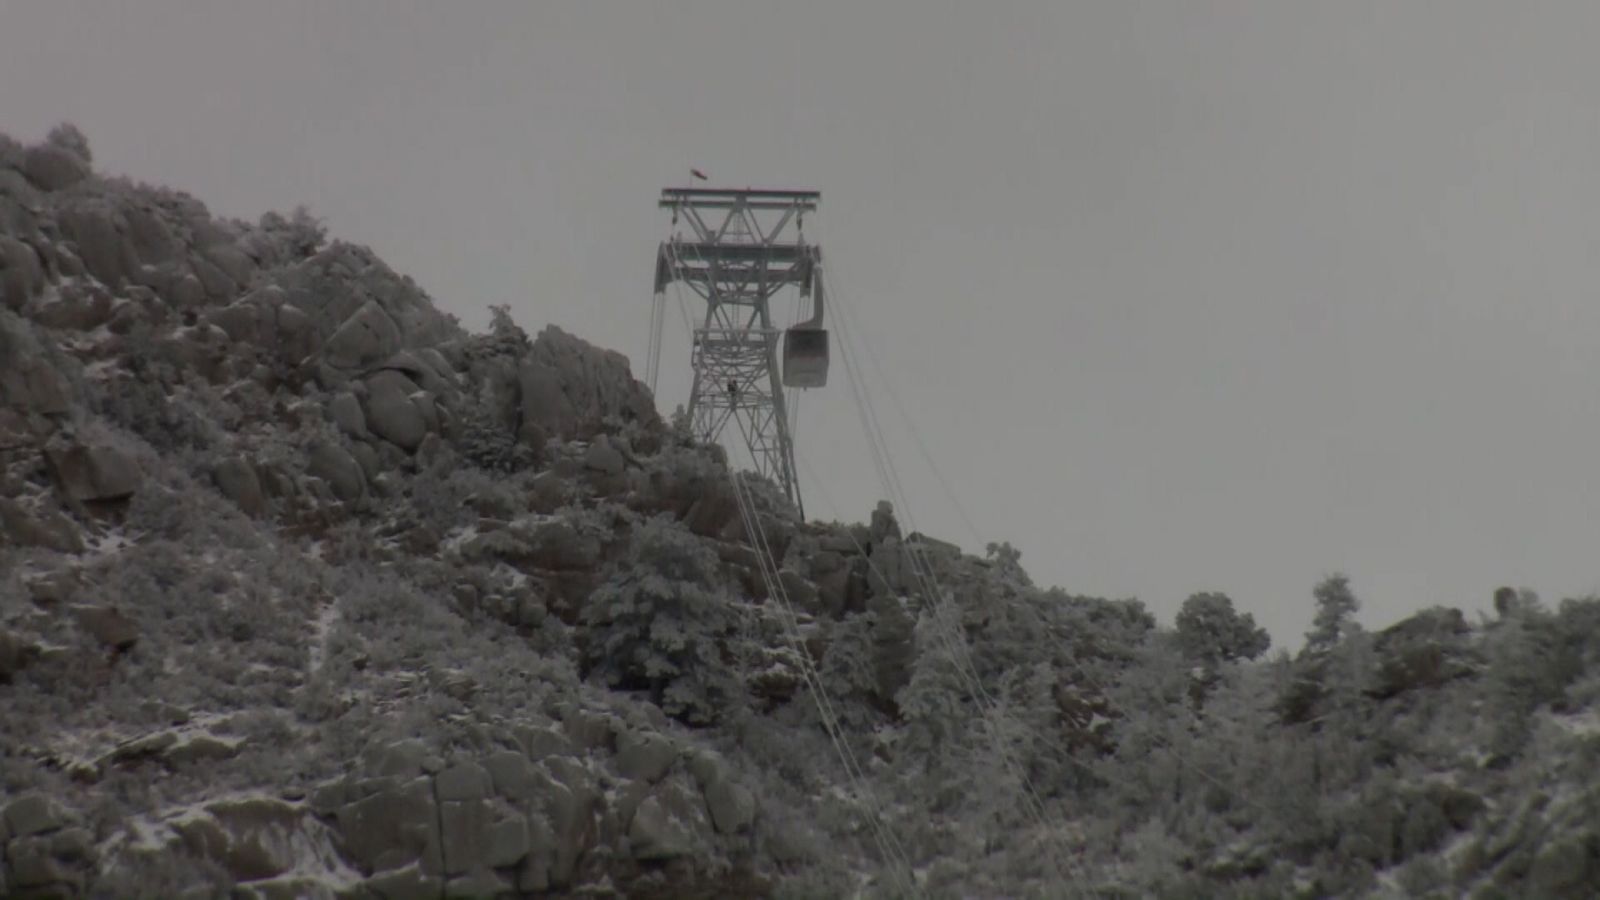 Group rescued after Sandia Tram gets stuck overnight